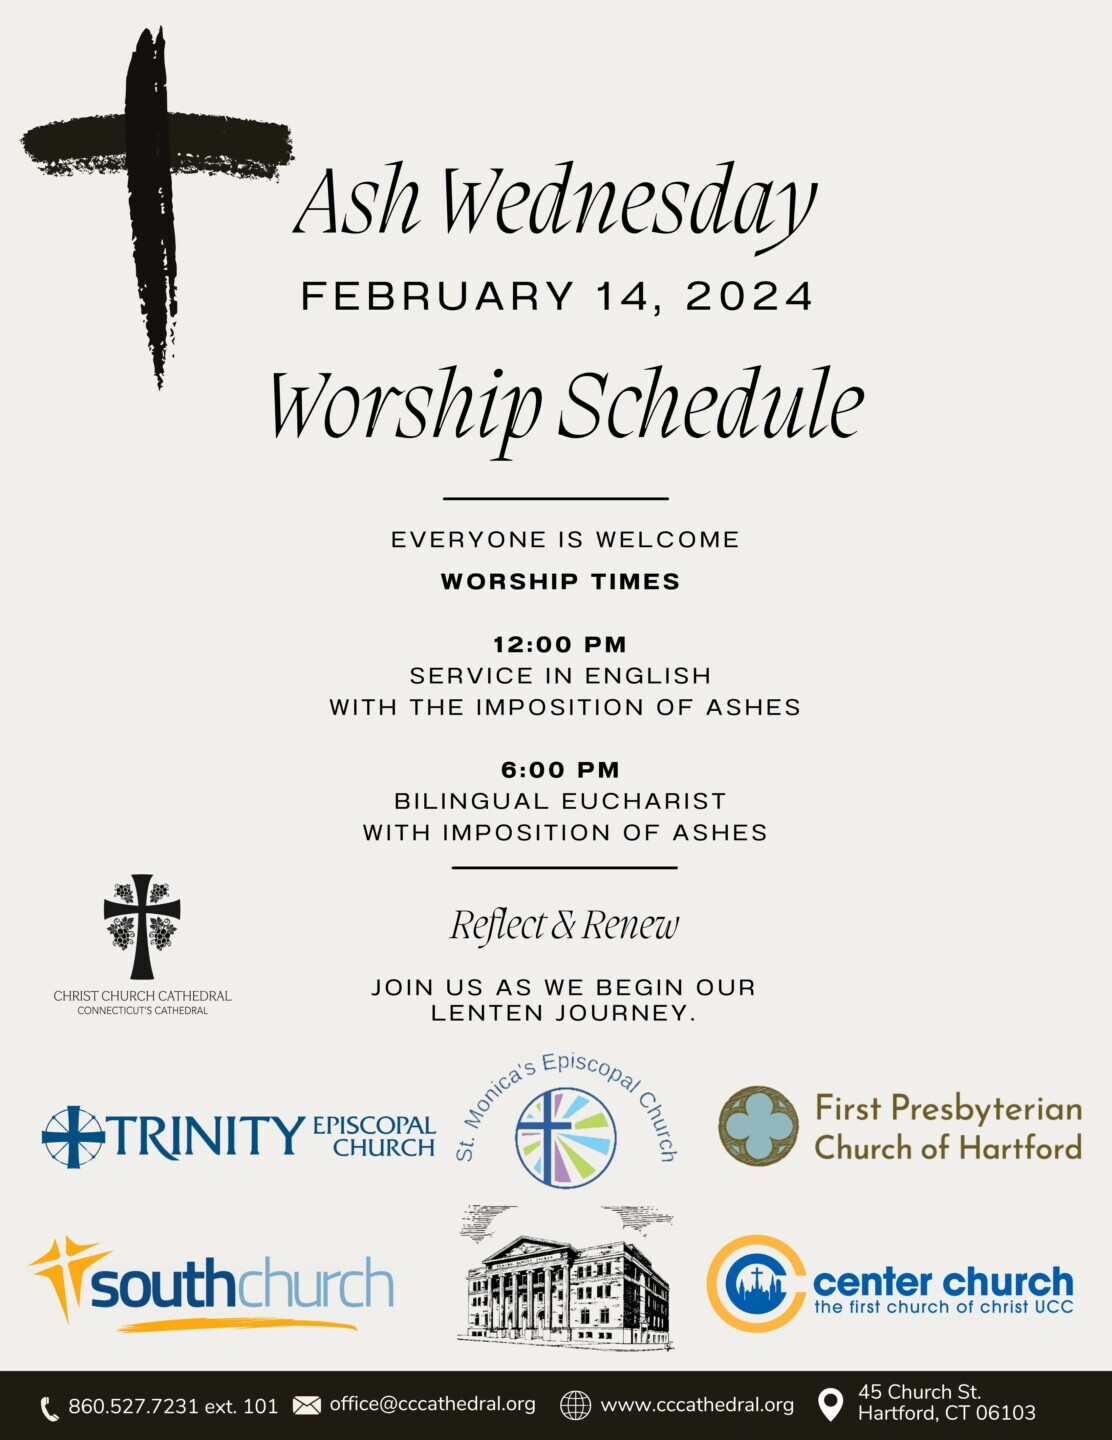 Ash Wednesday ~ bilingual Eucharist with imposition of ashes